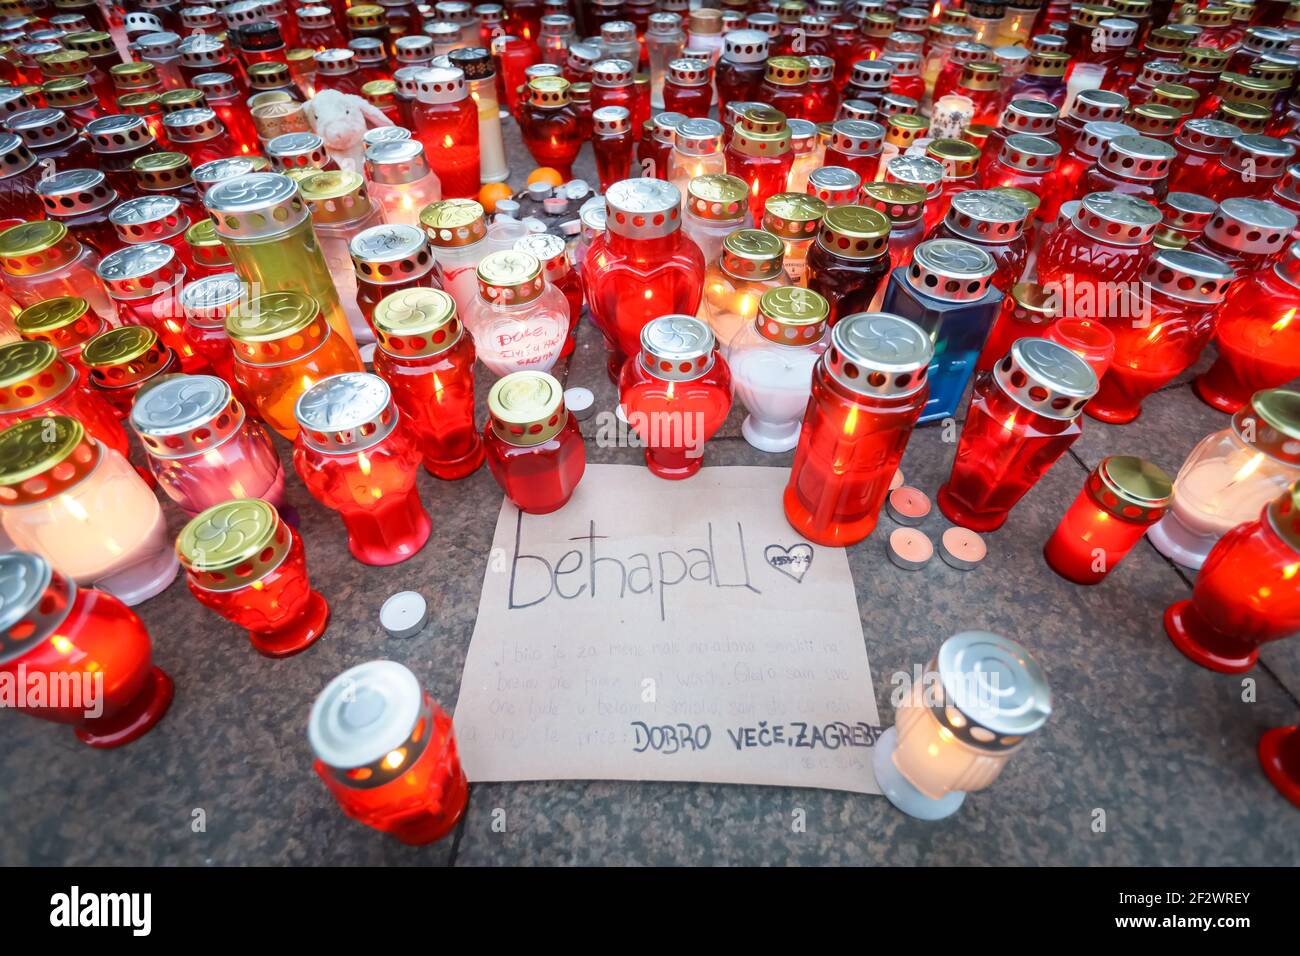 In Frane Petrica Street, near the lighting pole, people pay tribute with lighted lamps, flowers, plush toys, various messages and verses from the song Stock Photo